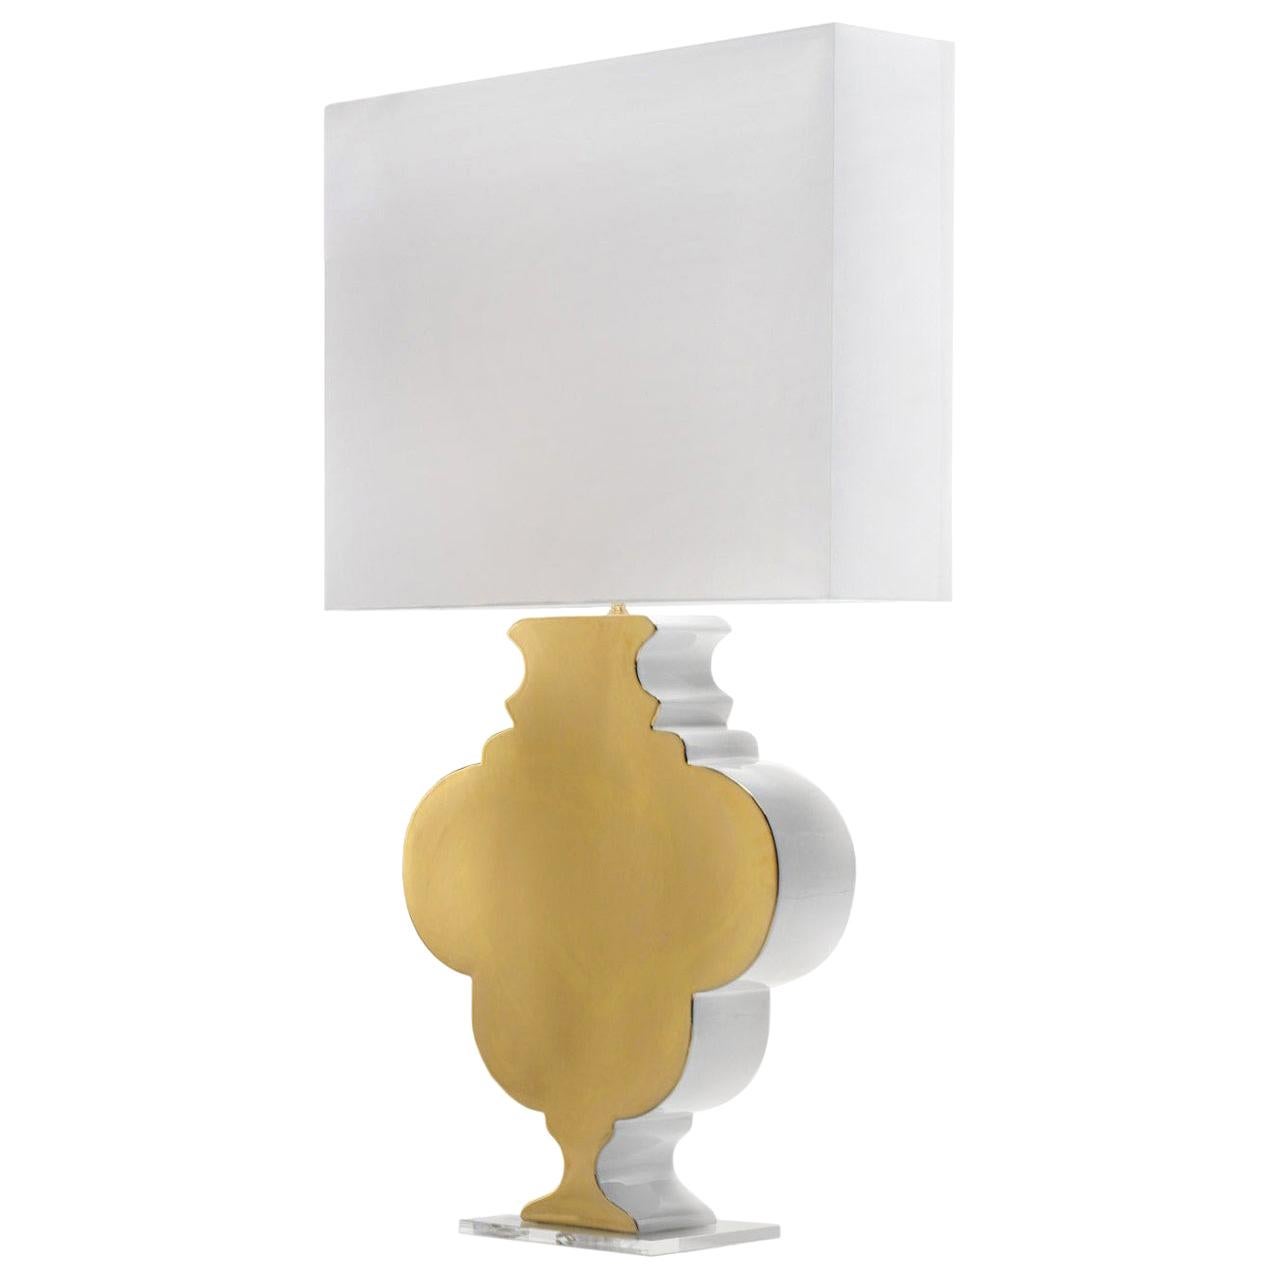 Ceramic Lamp "GRACE 50" Handcrafted in White and 24-Karat Gold by Gabriella B. For Sale